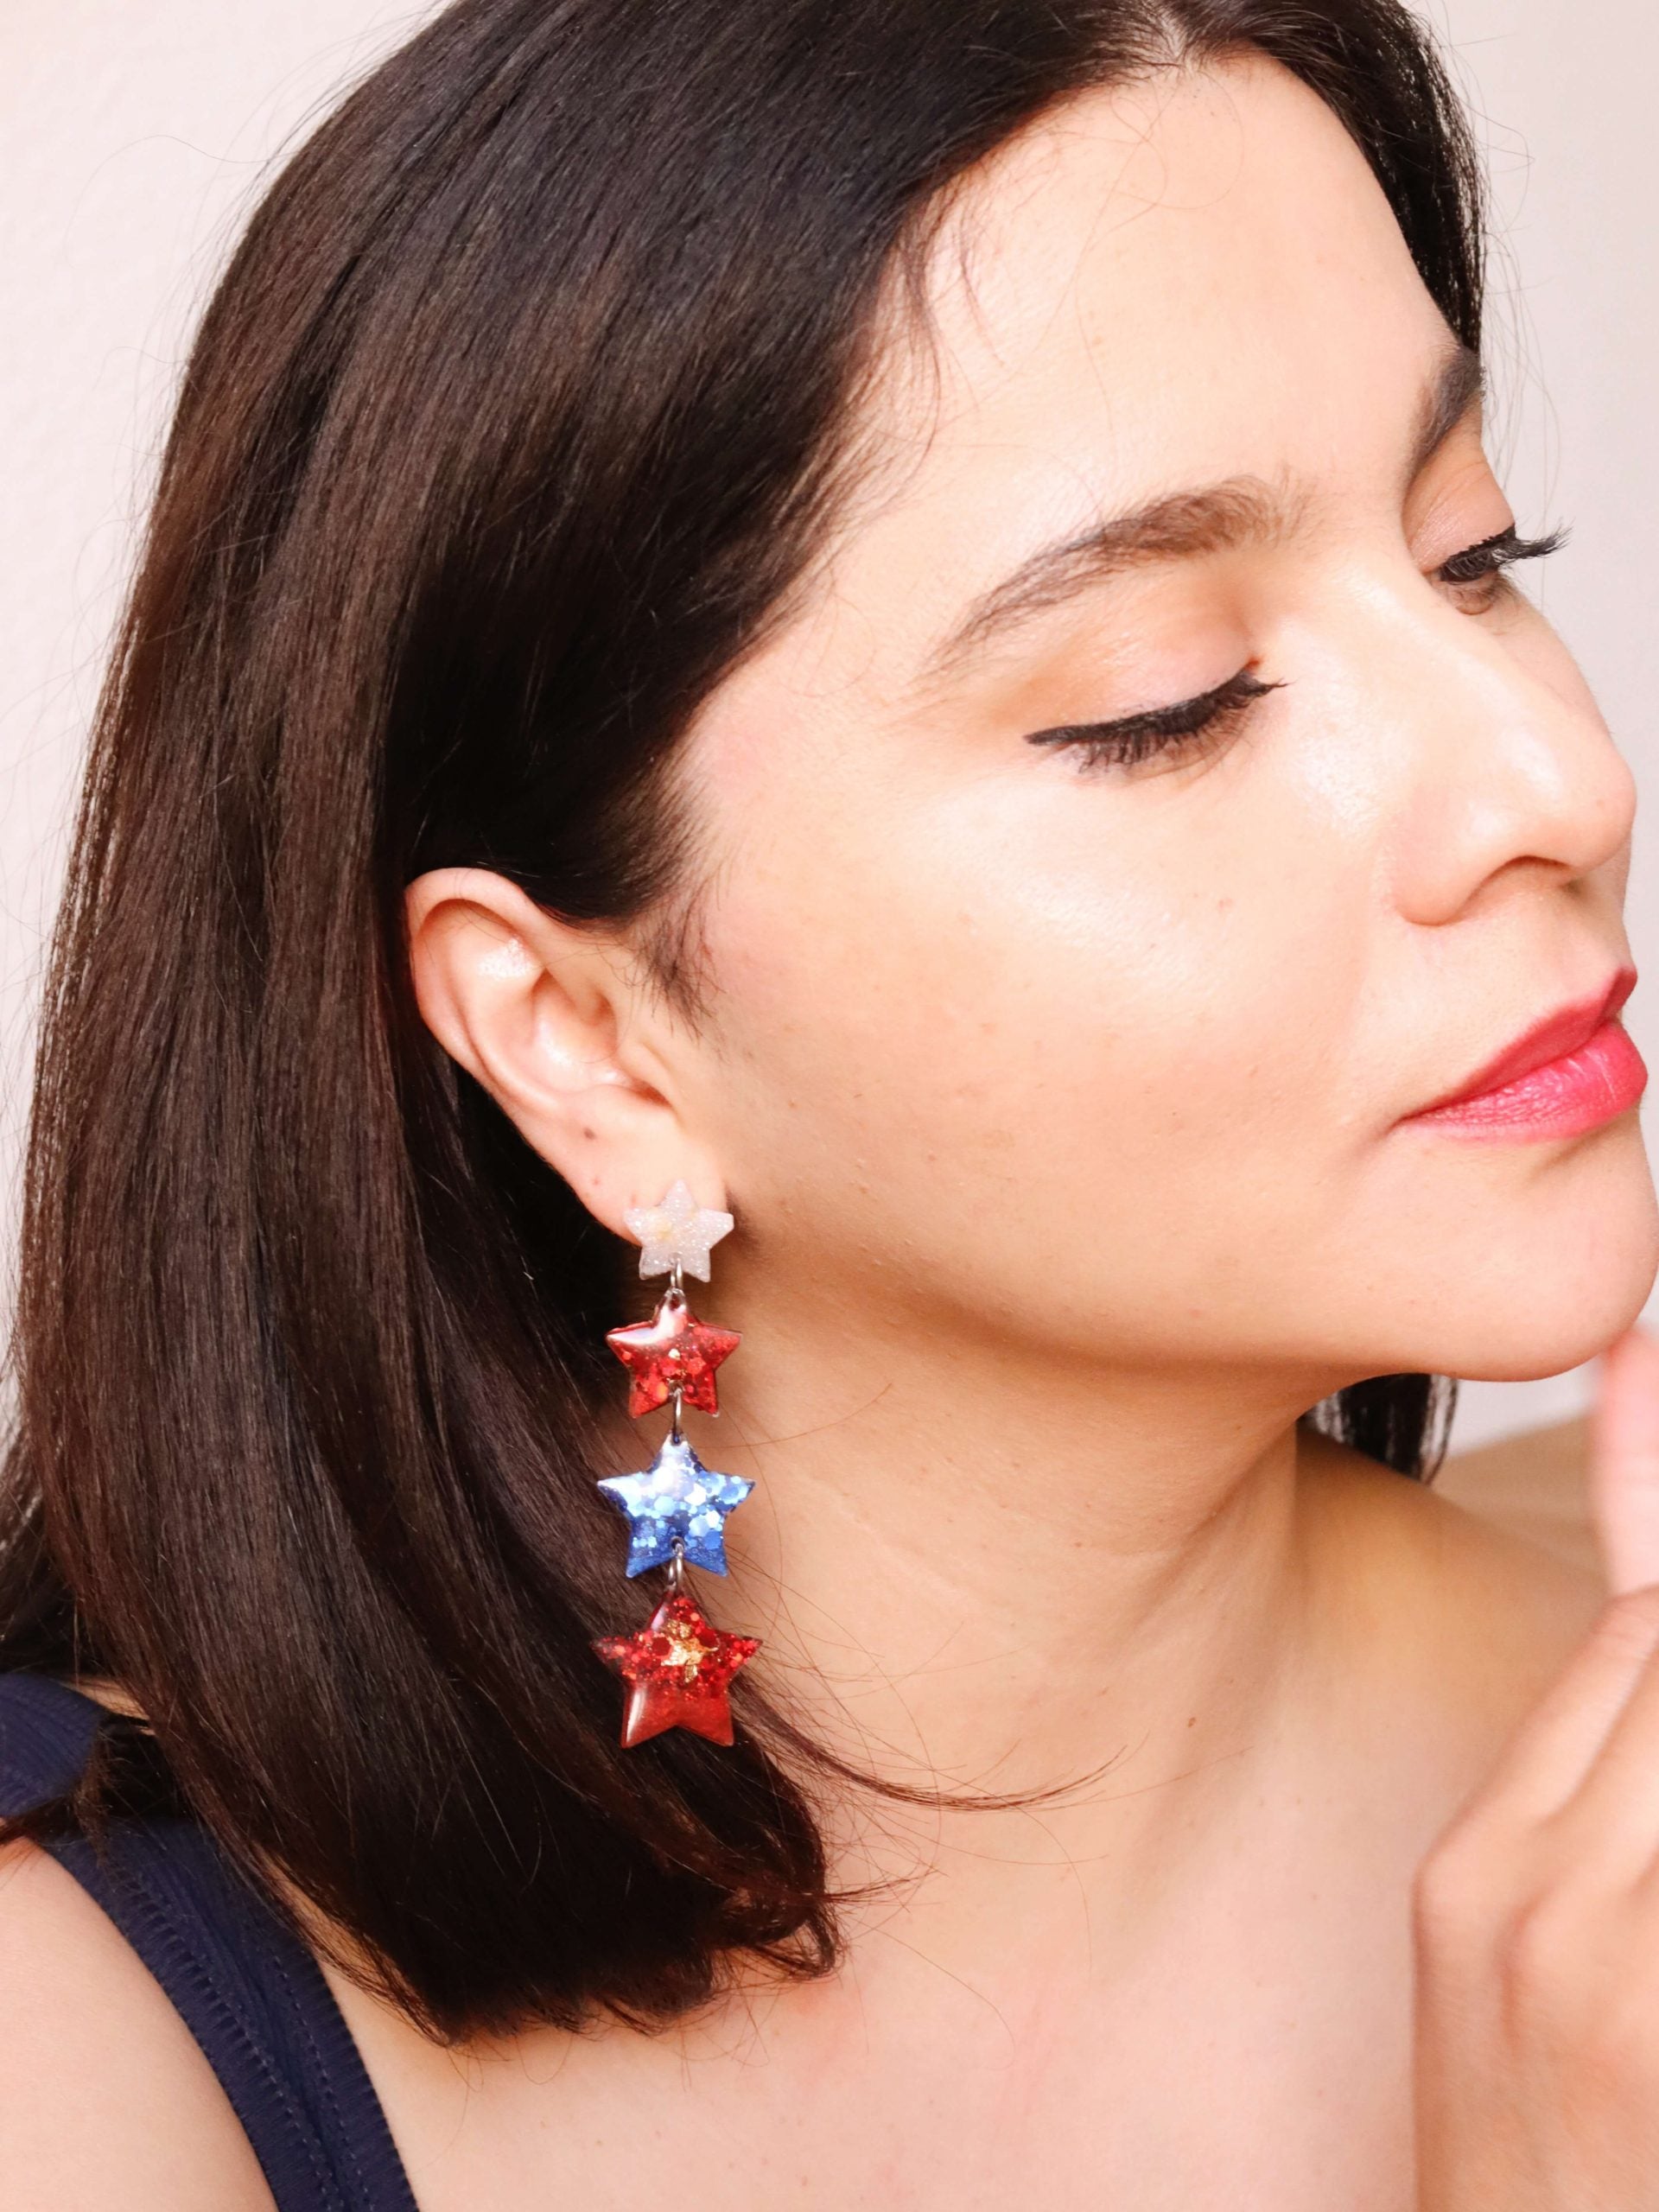 long-patriotic-star-earrings---red-white-and-blue-earrings---red-white-and-blue-jewelry---kaleidoscopes-and-polka-dots